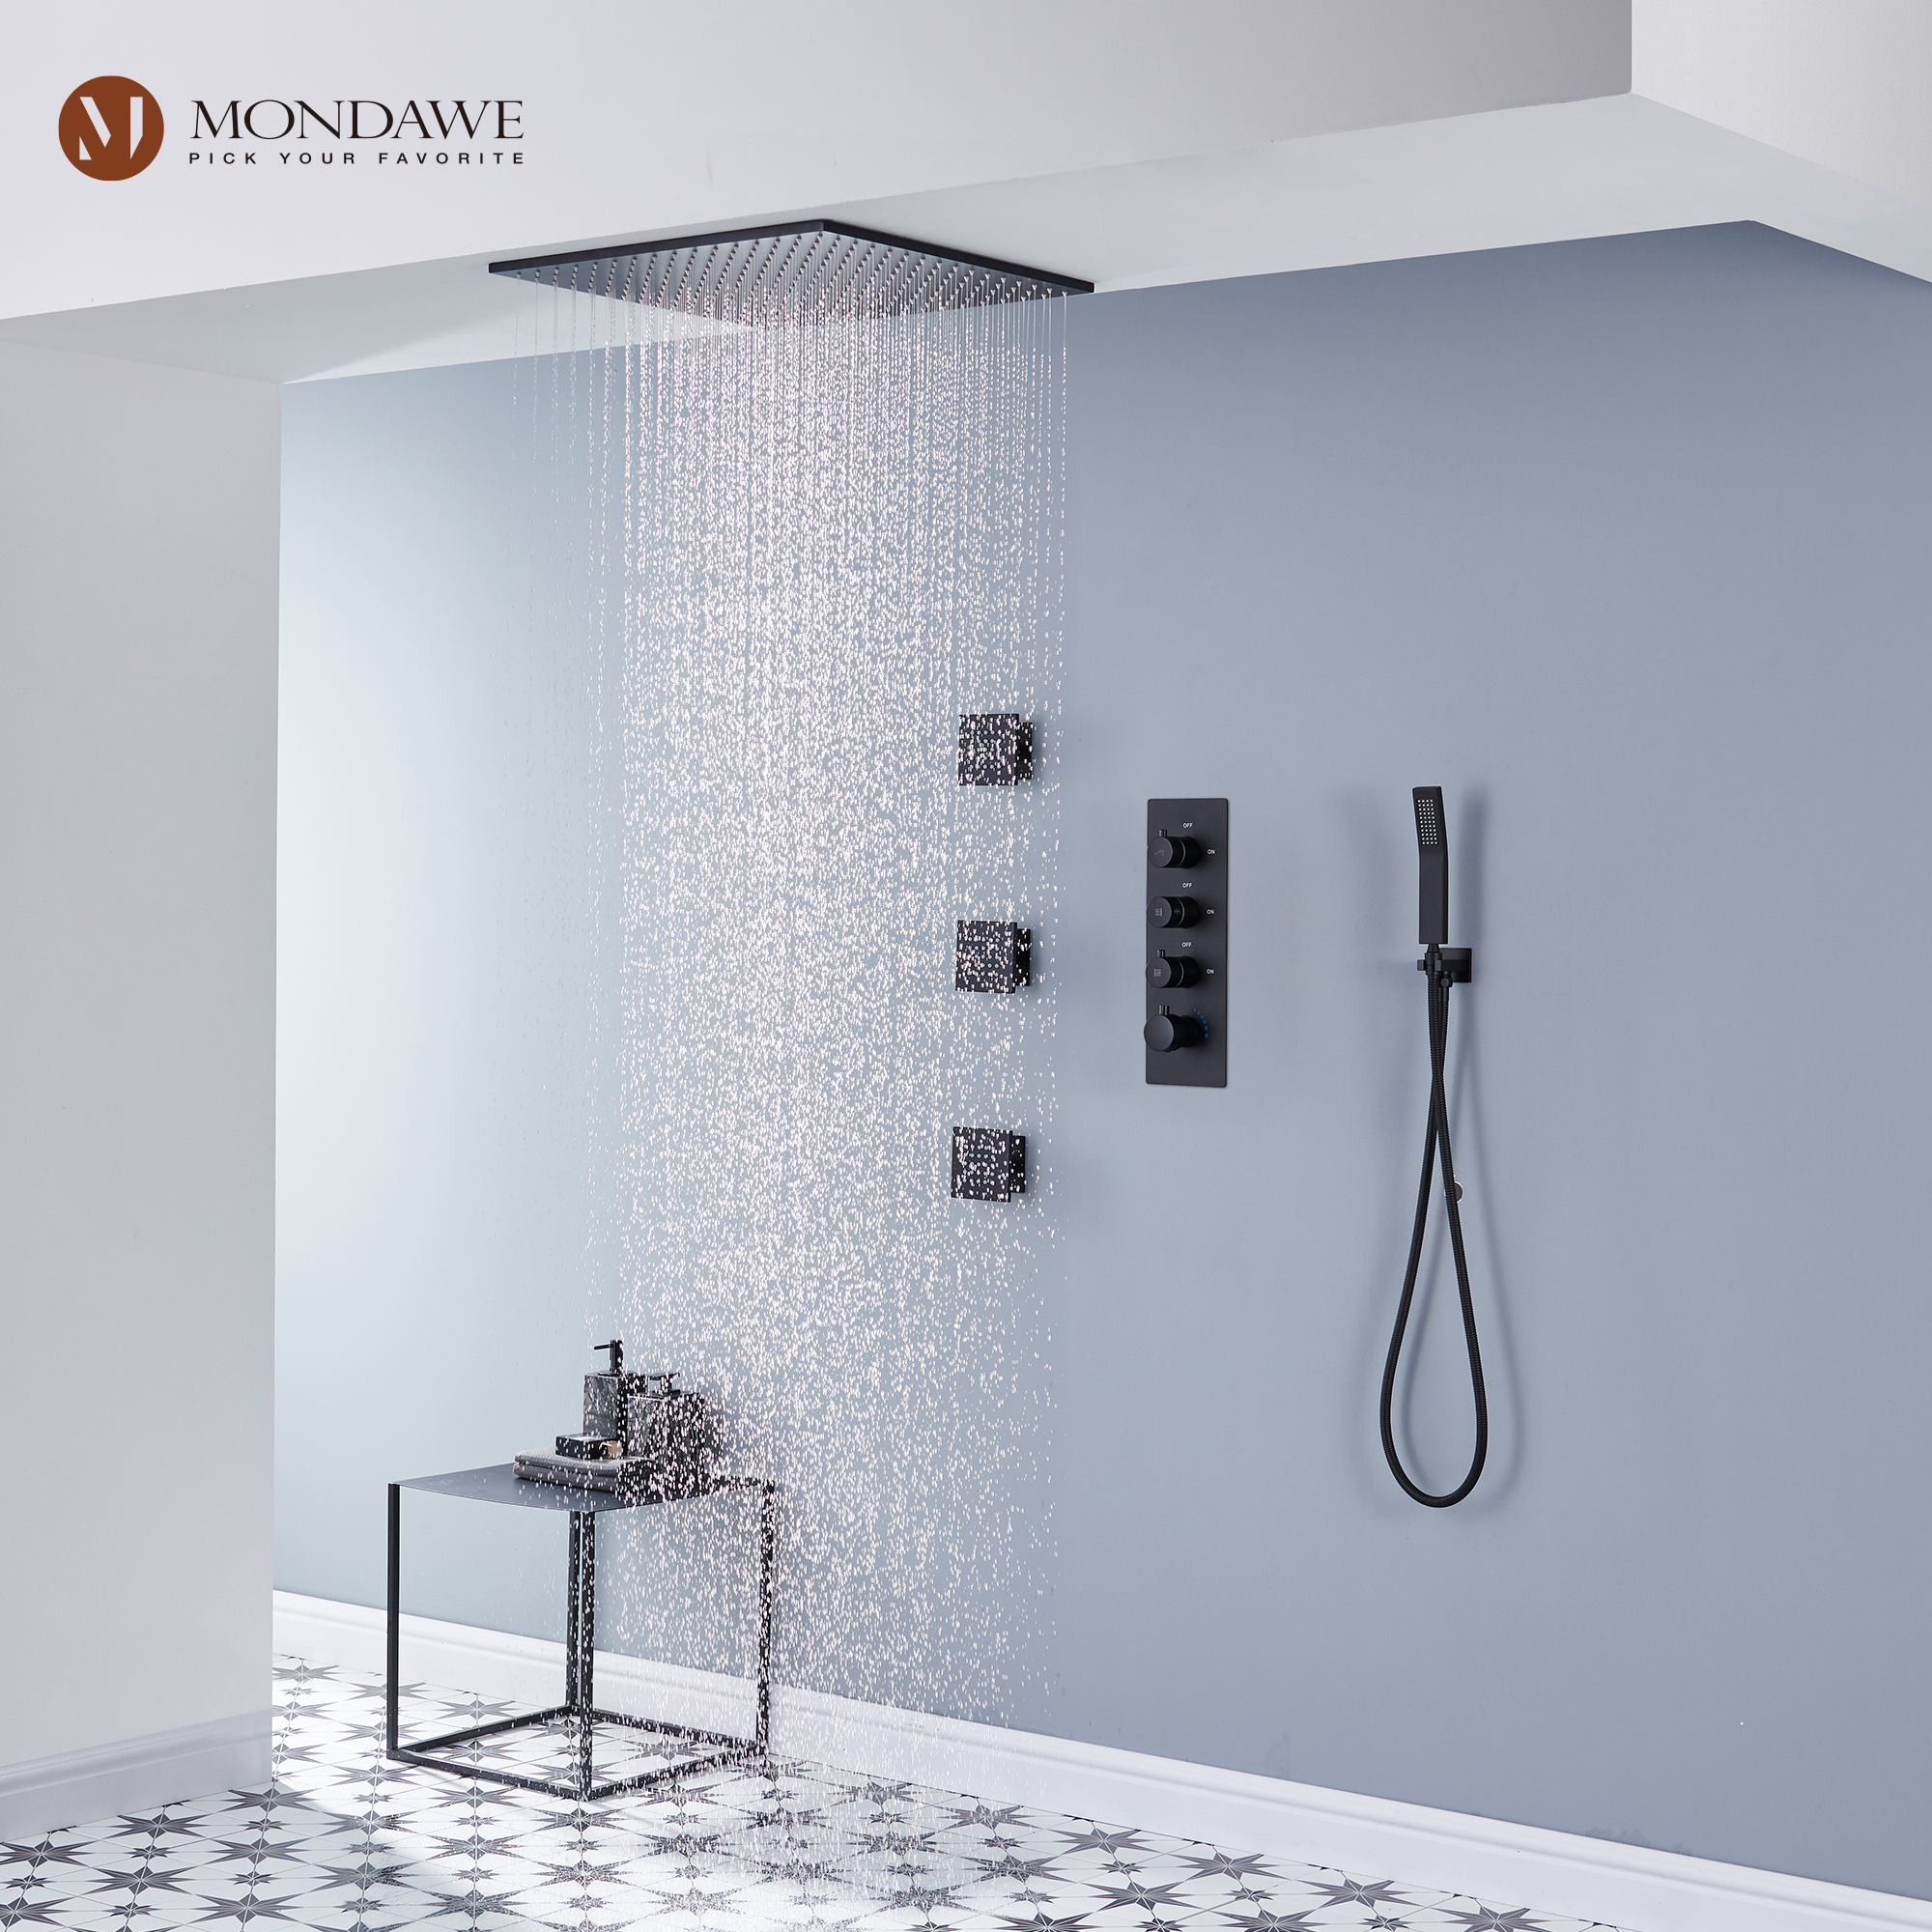 better water coverage and pressure of ceiling shower head